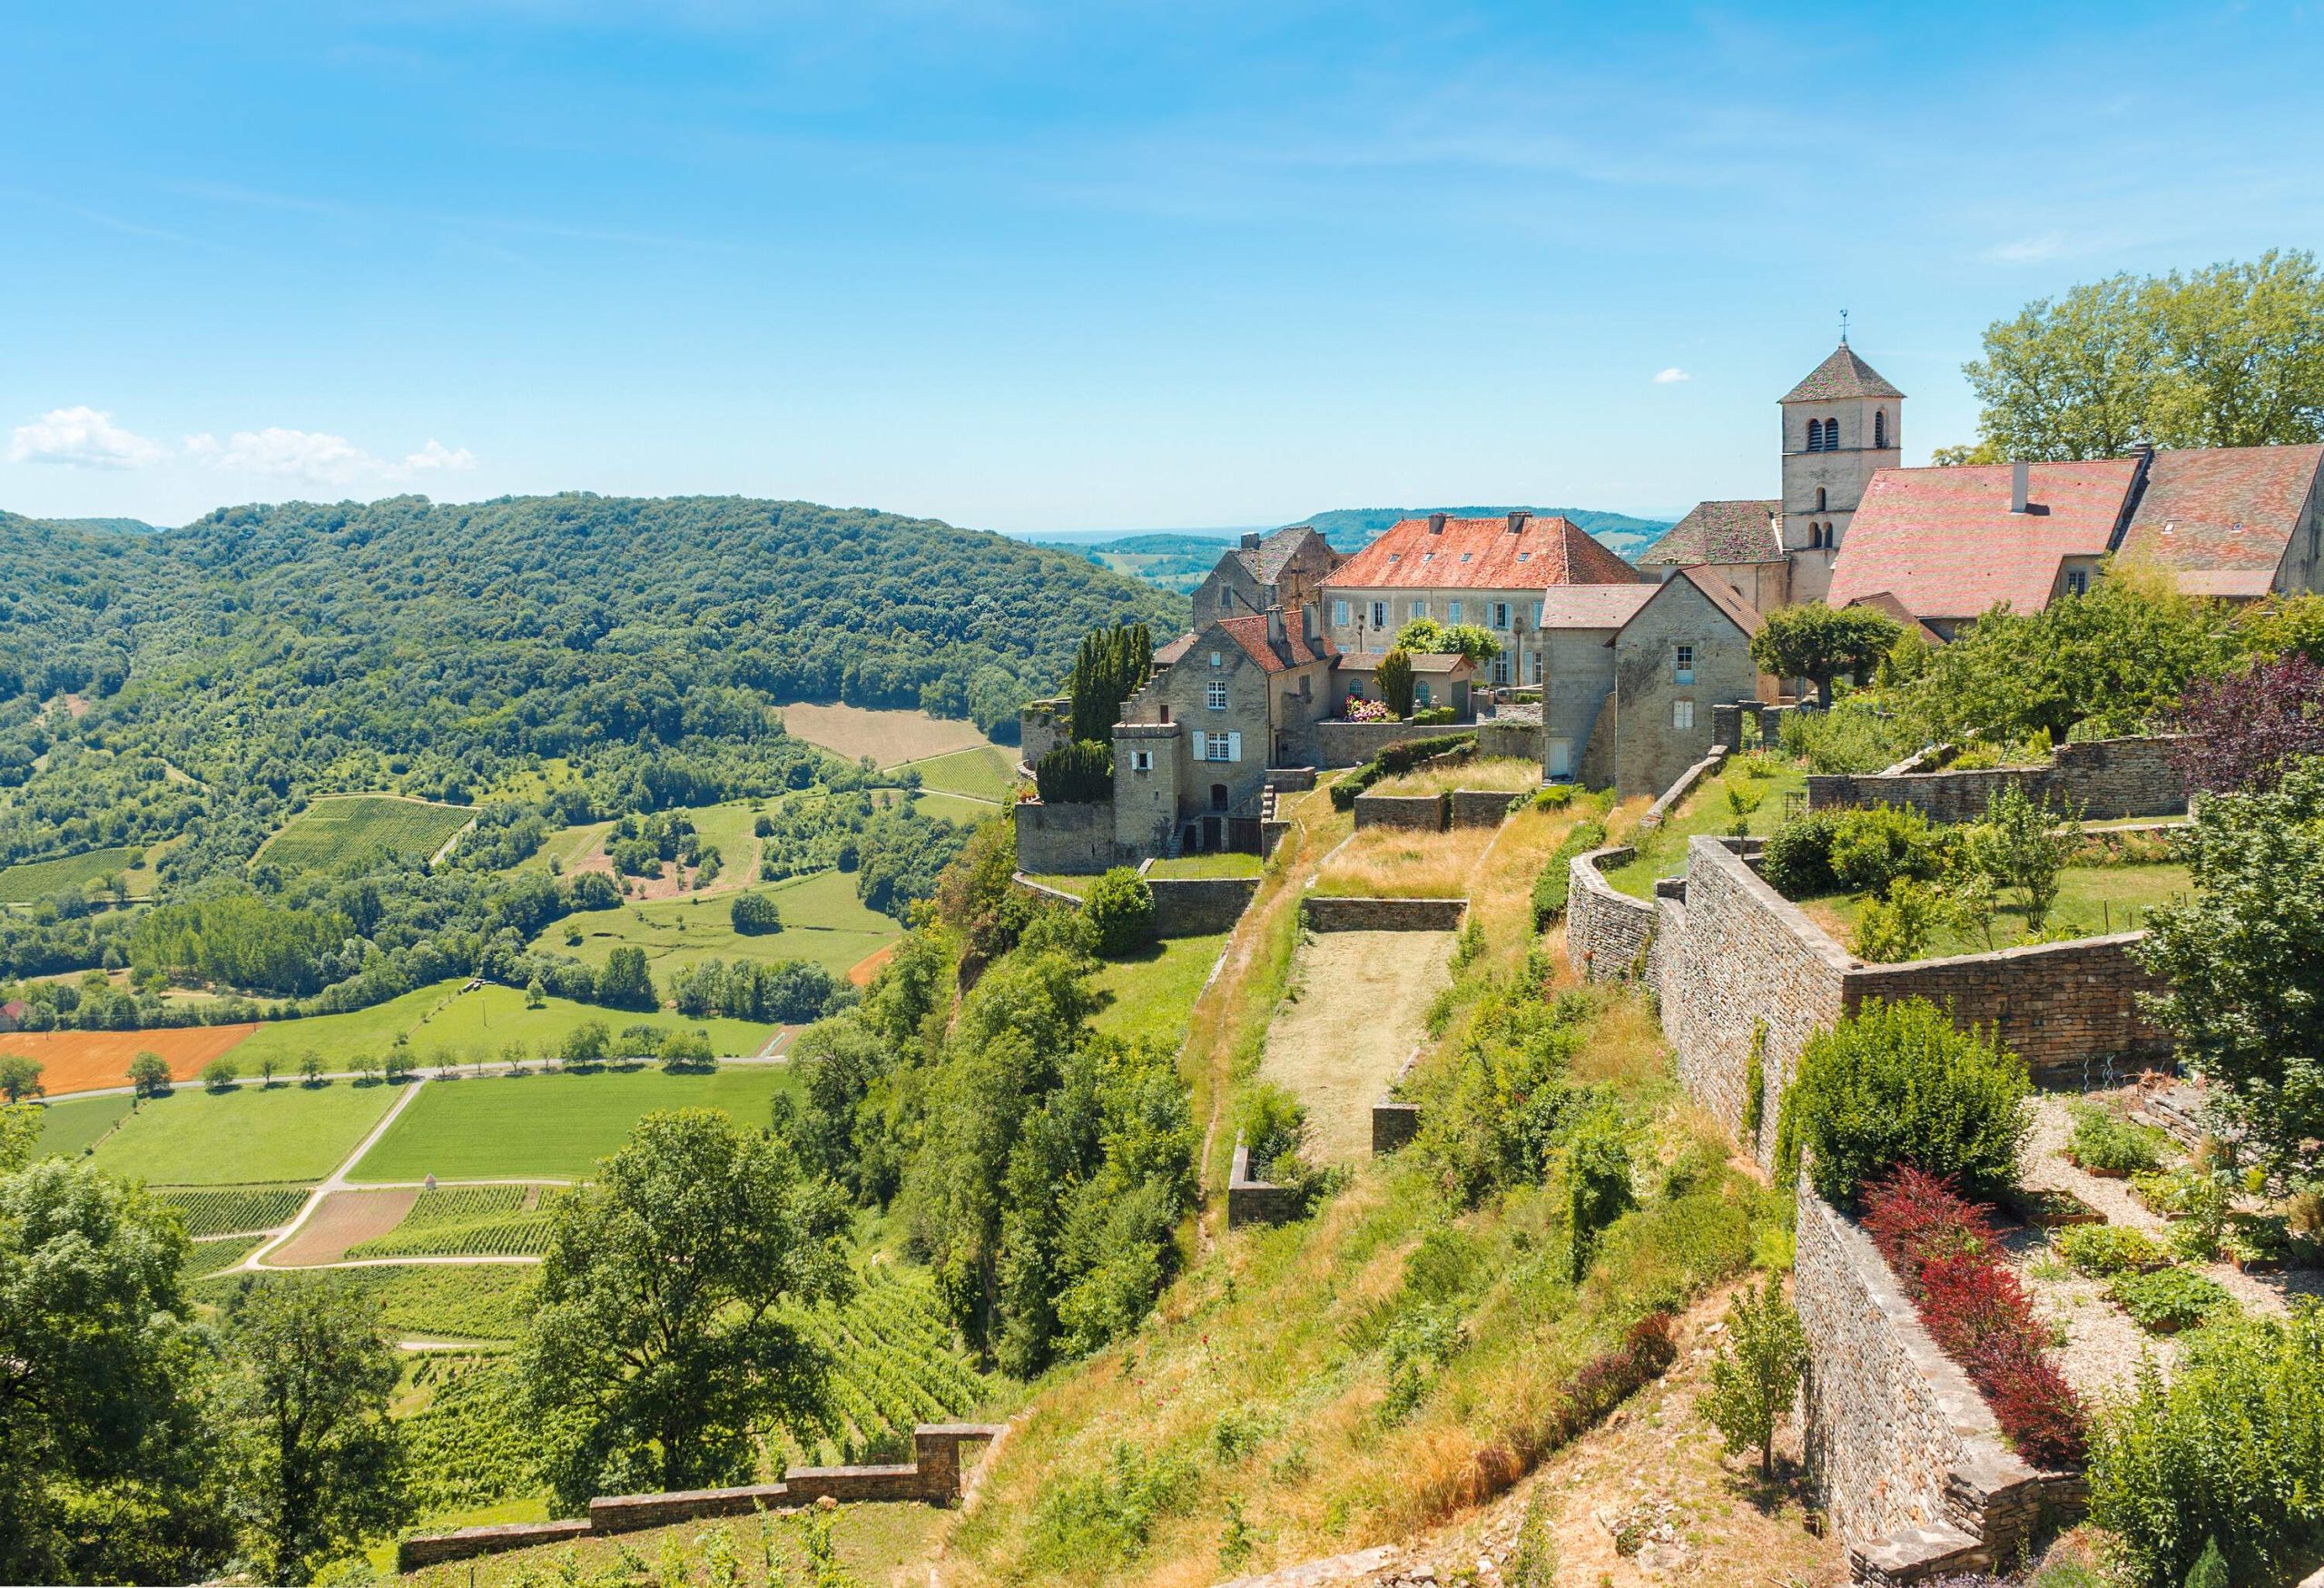 View of the picturesque medieval village in valley. Chalon, Departement Jura, Franche-Comte, France